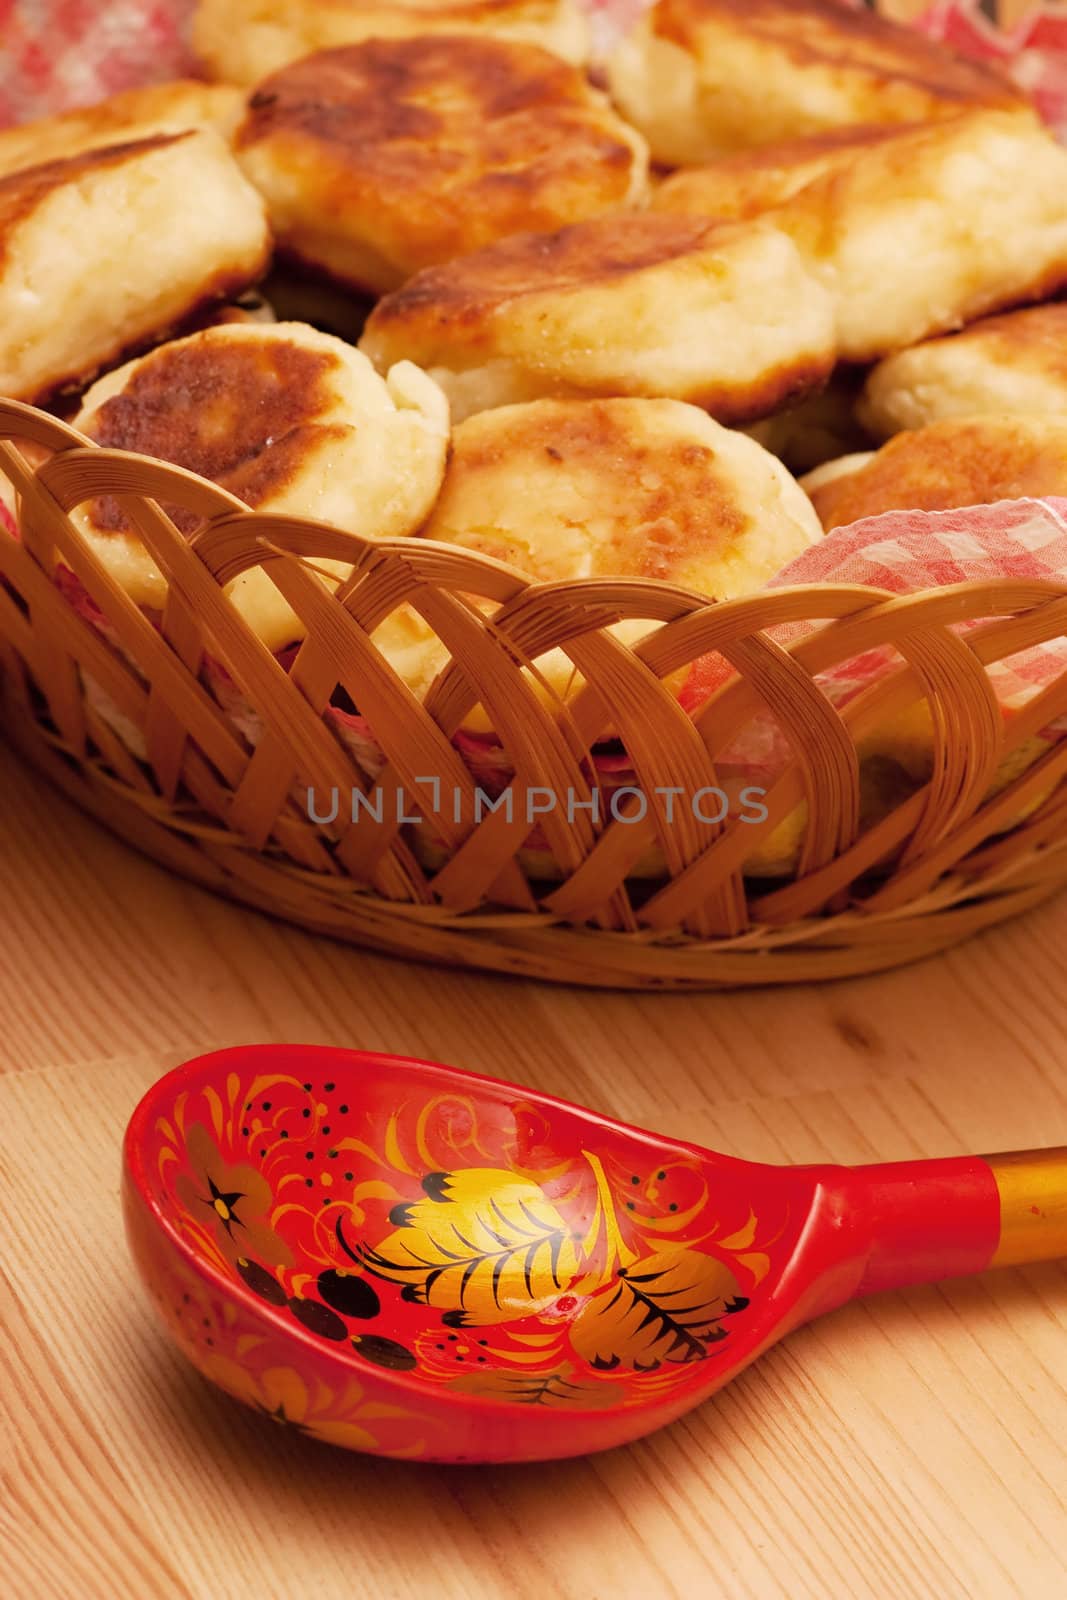 Curd pancakes and decorated spoon on a wood table